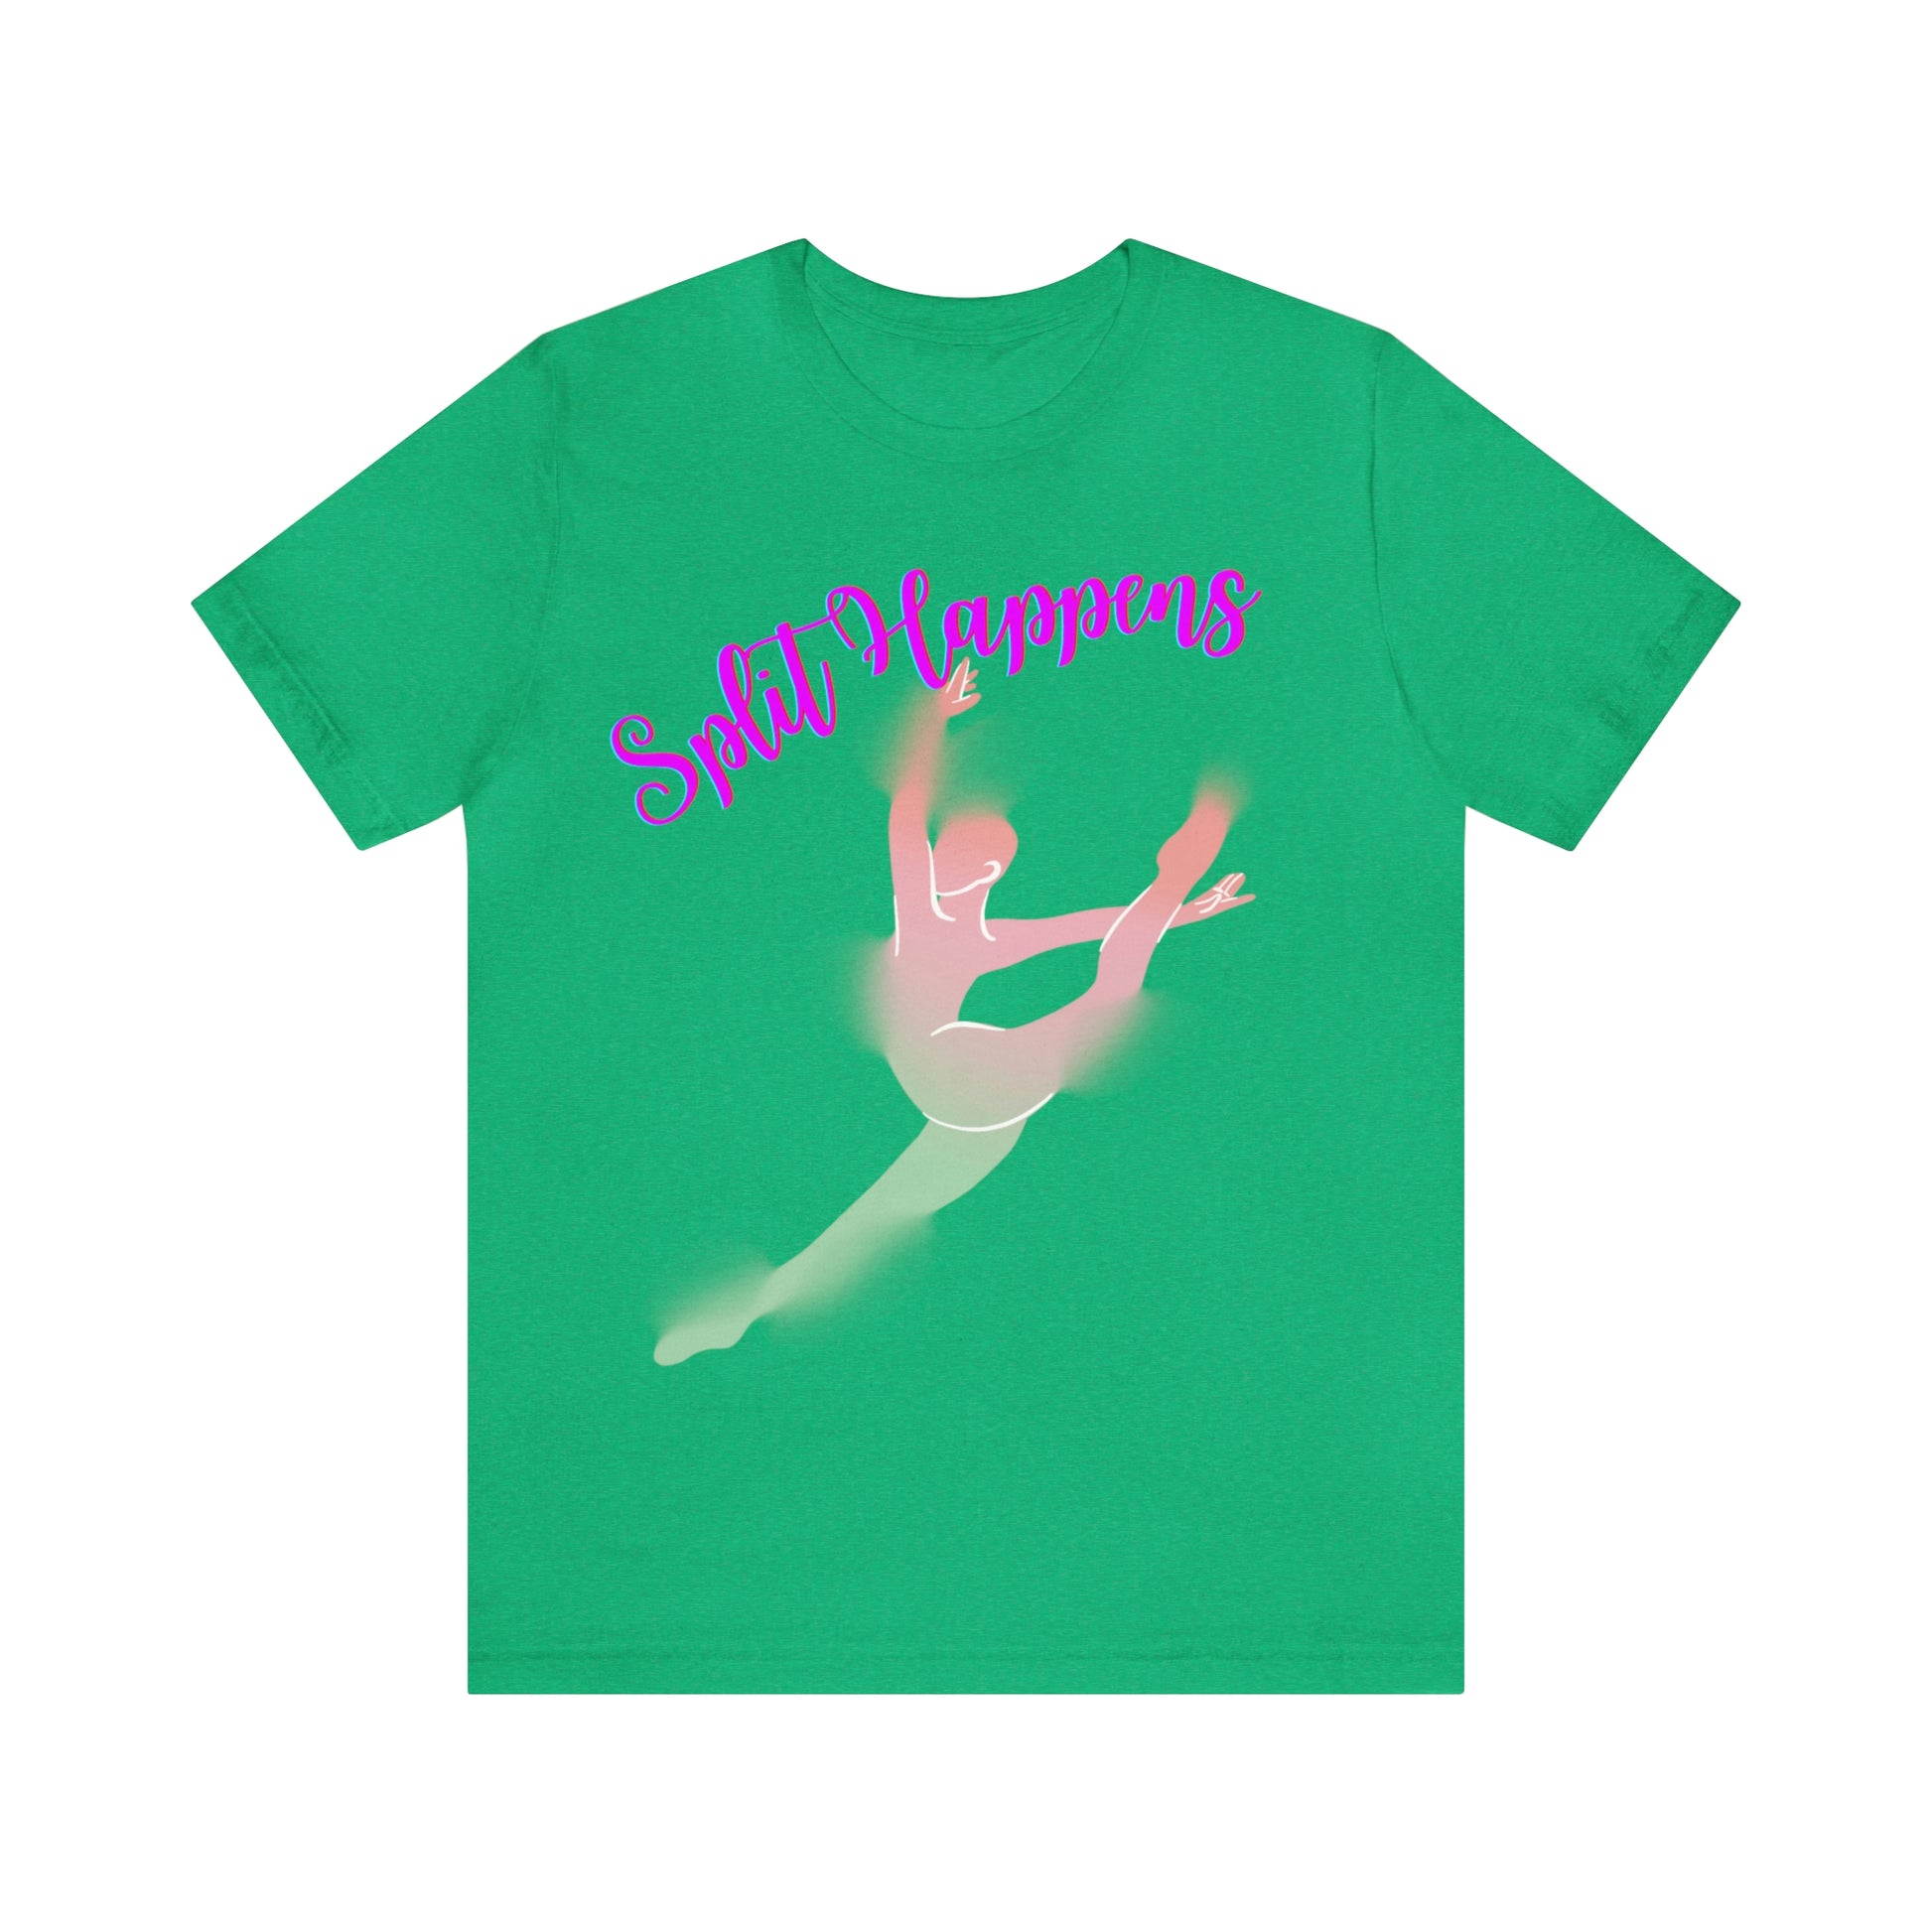 A T-shirt with the text "Split happens" and a picture of a ballerina doing the splits